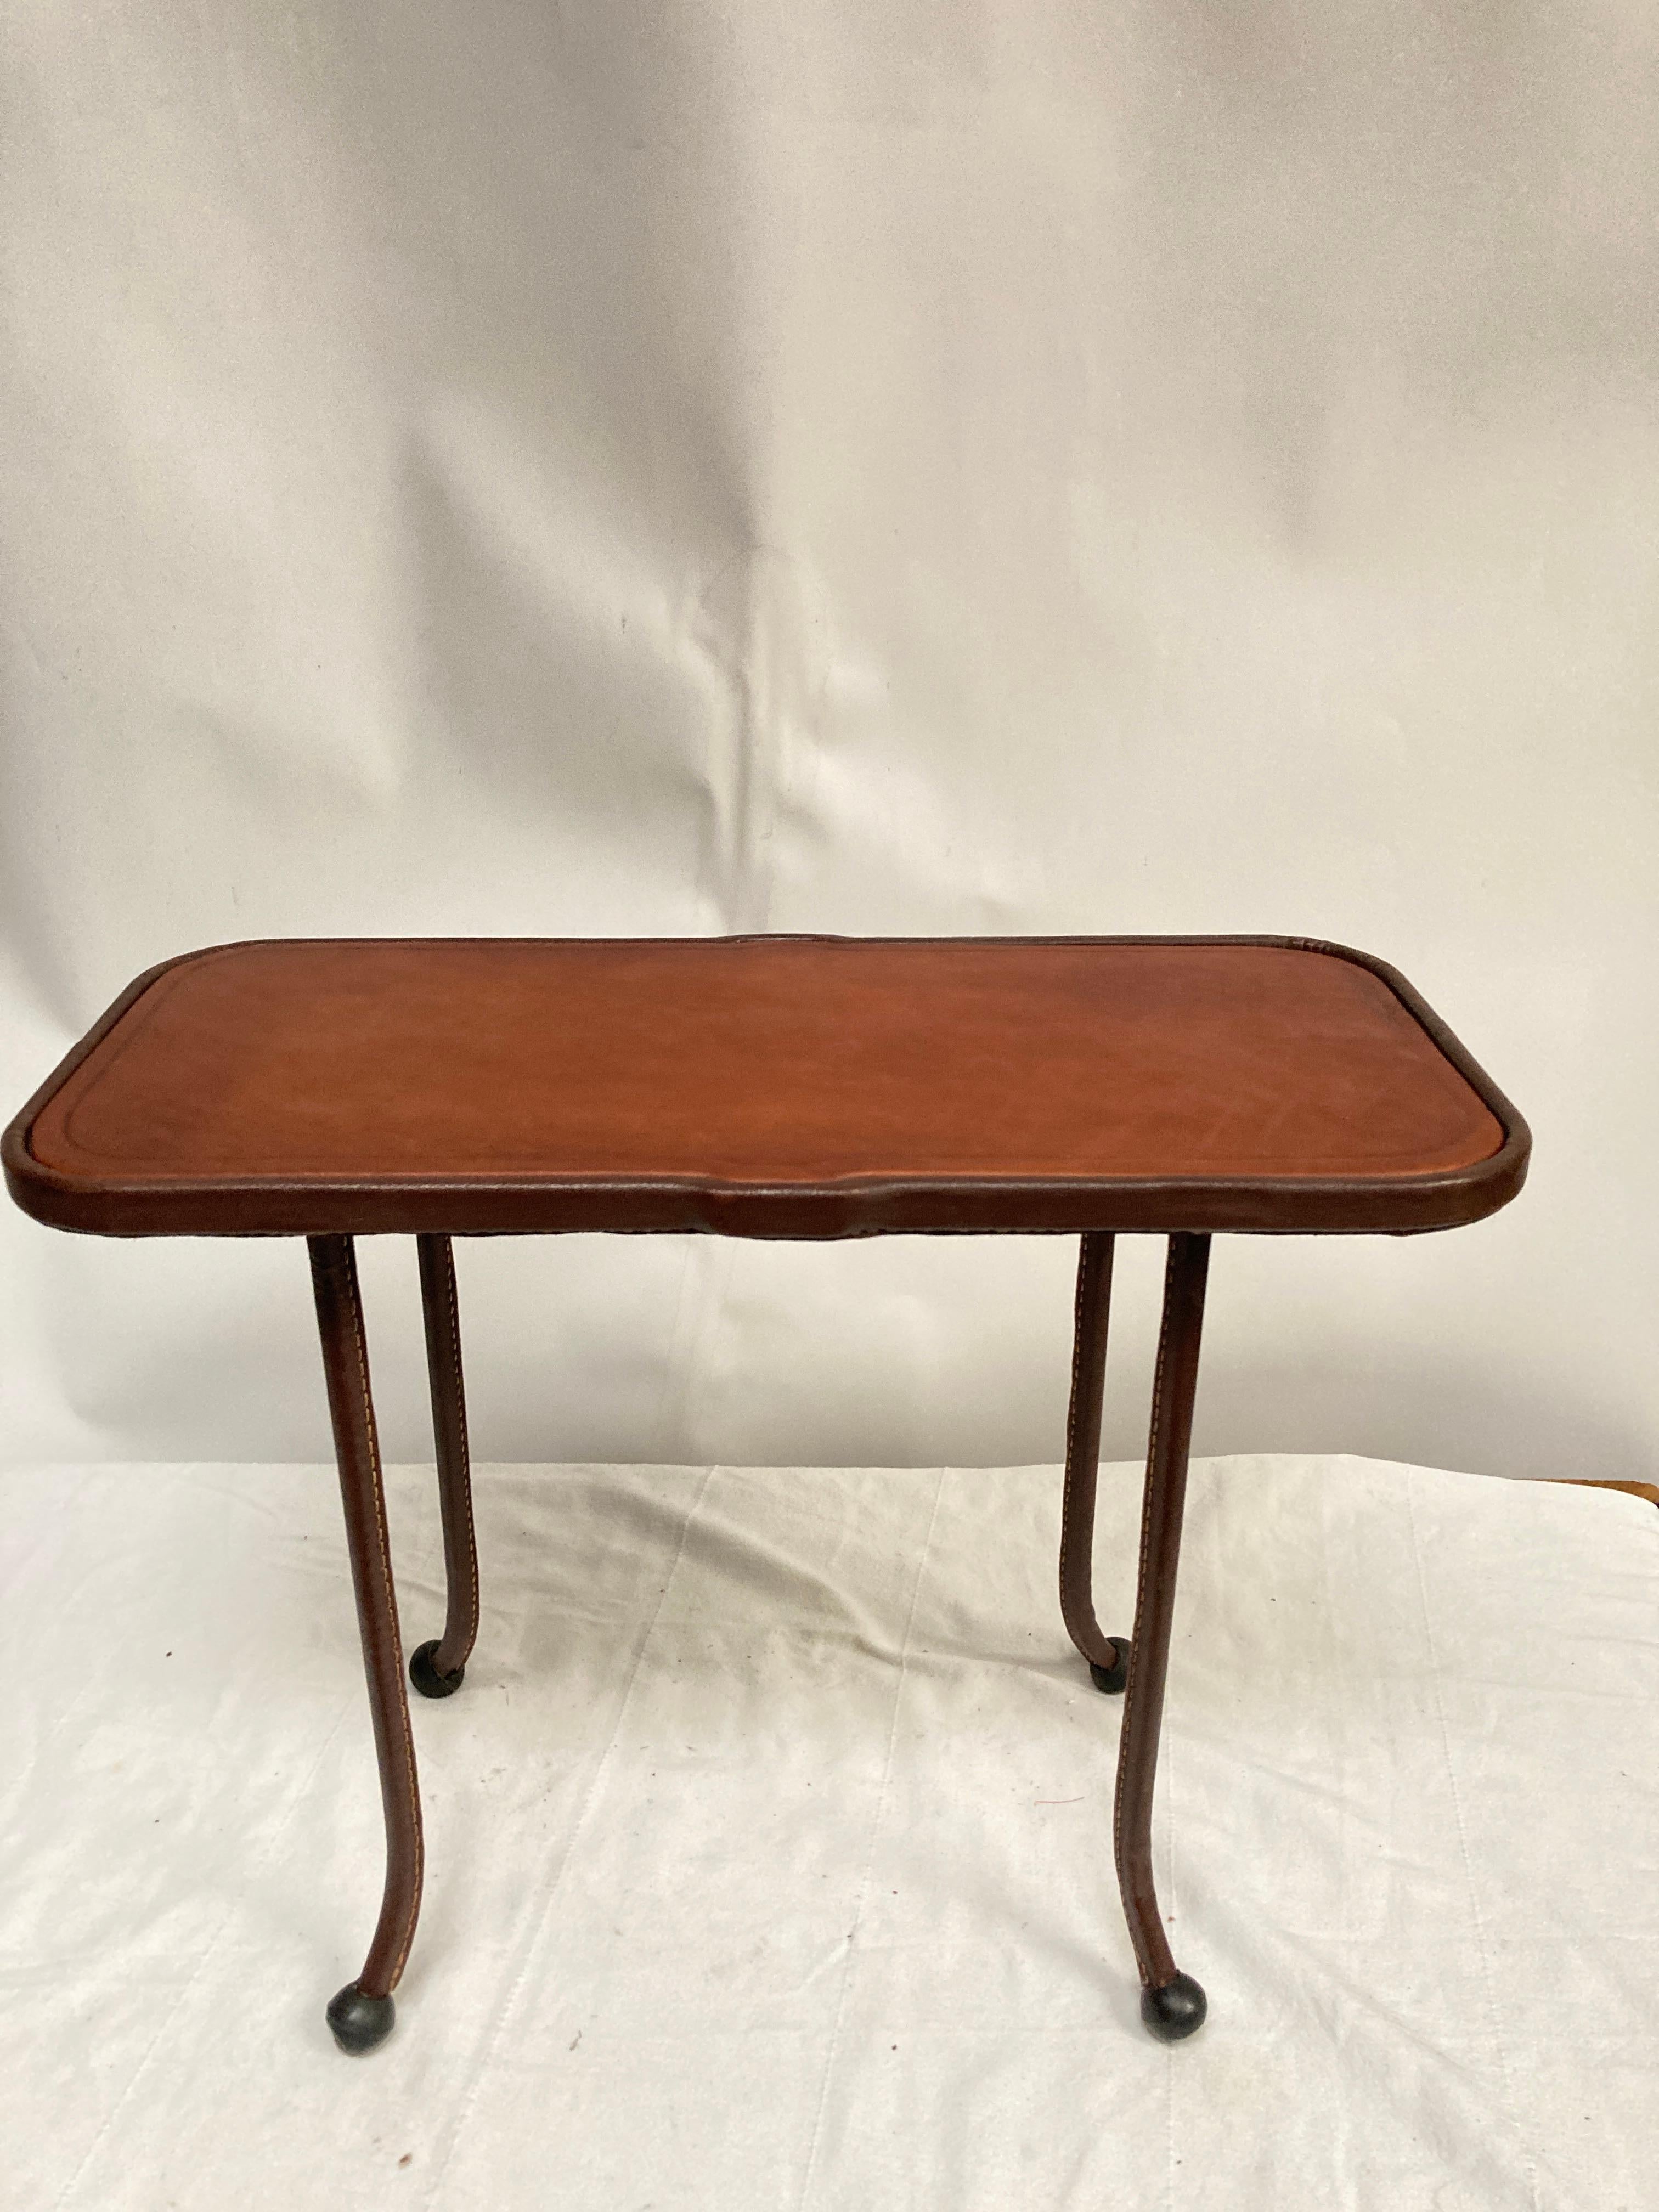 1950's Stitched leather side table by Jacques Adnet In Good Condition For Sale In Bois-Colombes, FR